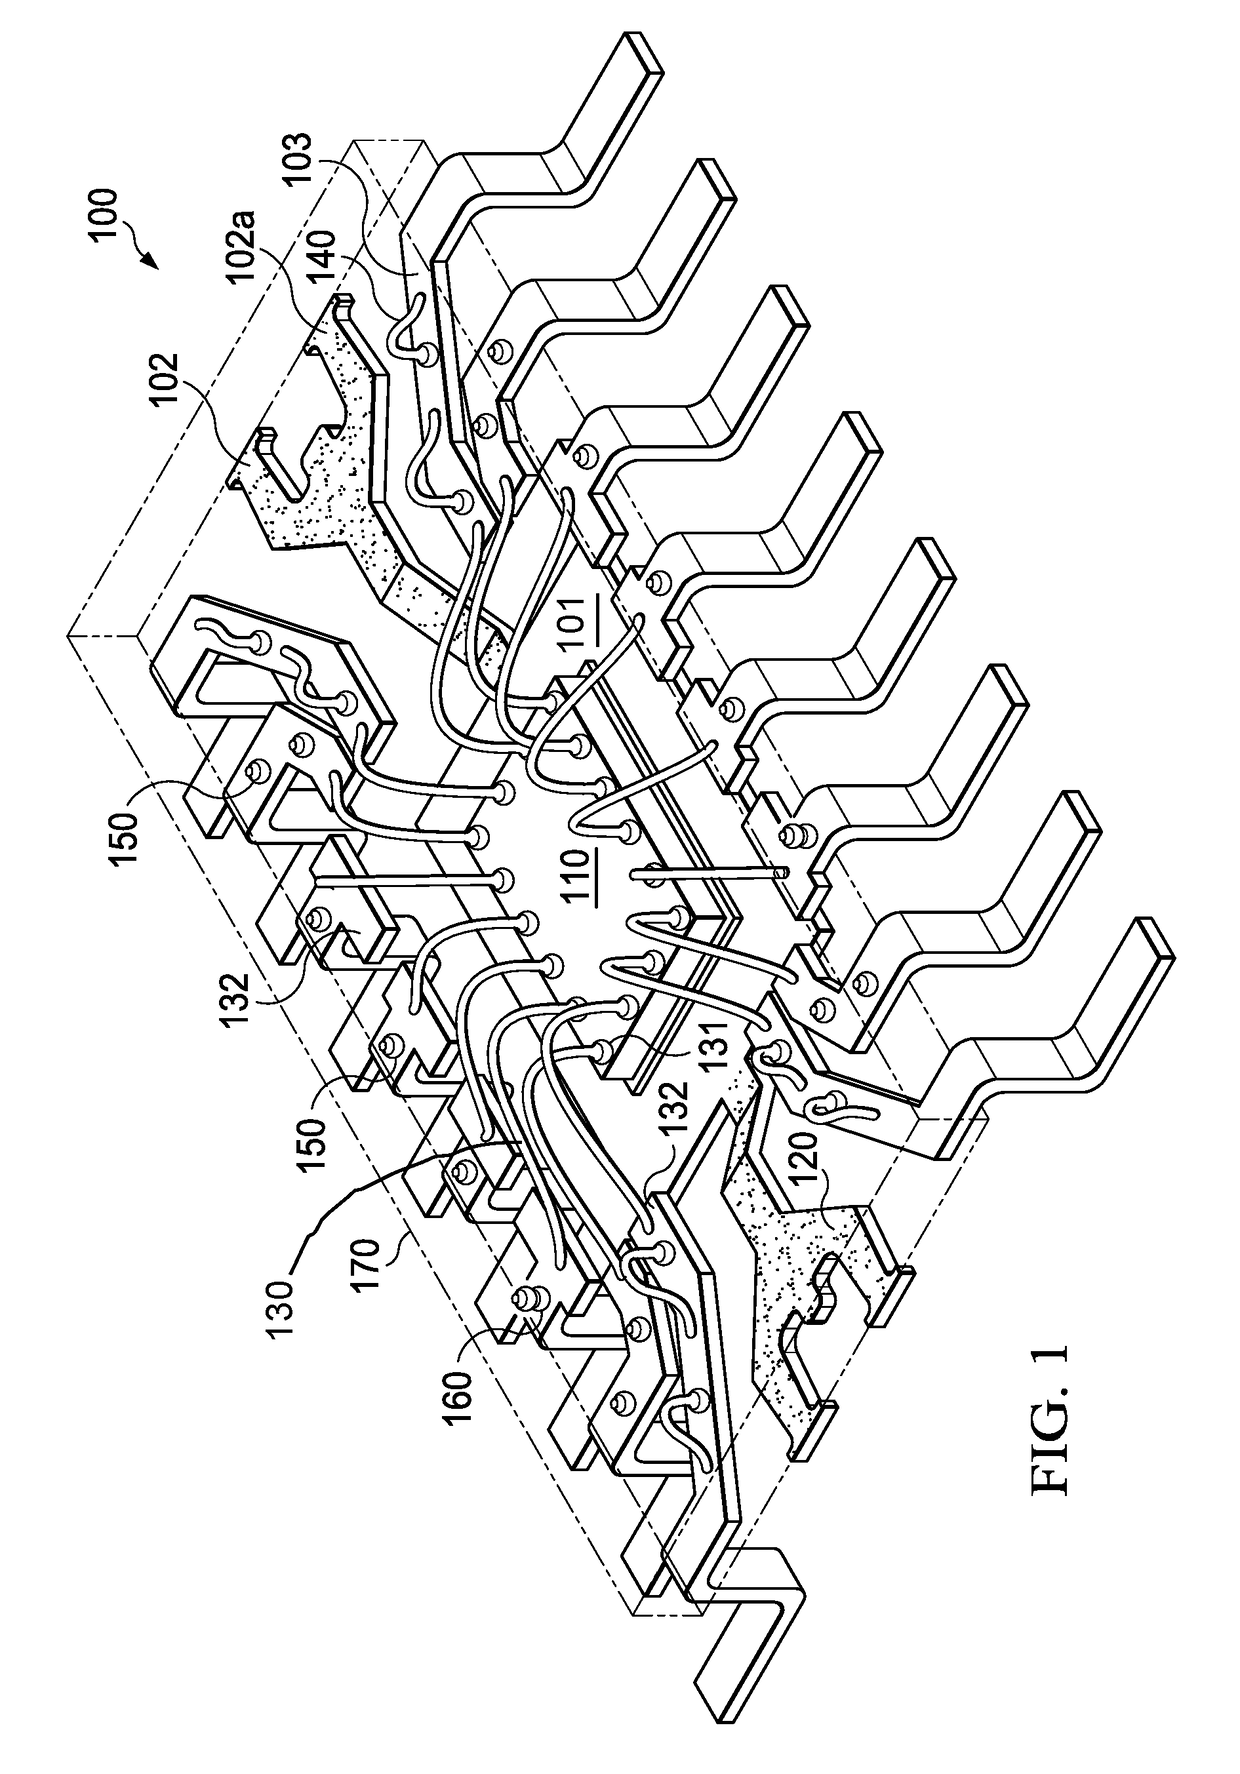 Structure and method for diminishing delamination of packaged semiconductor devices